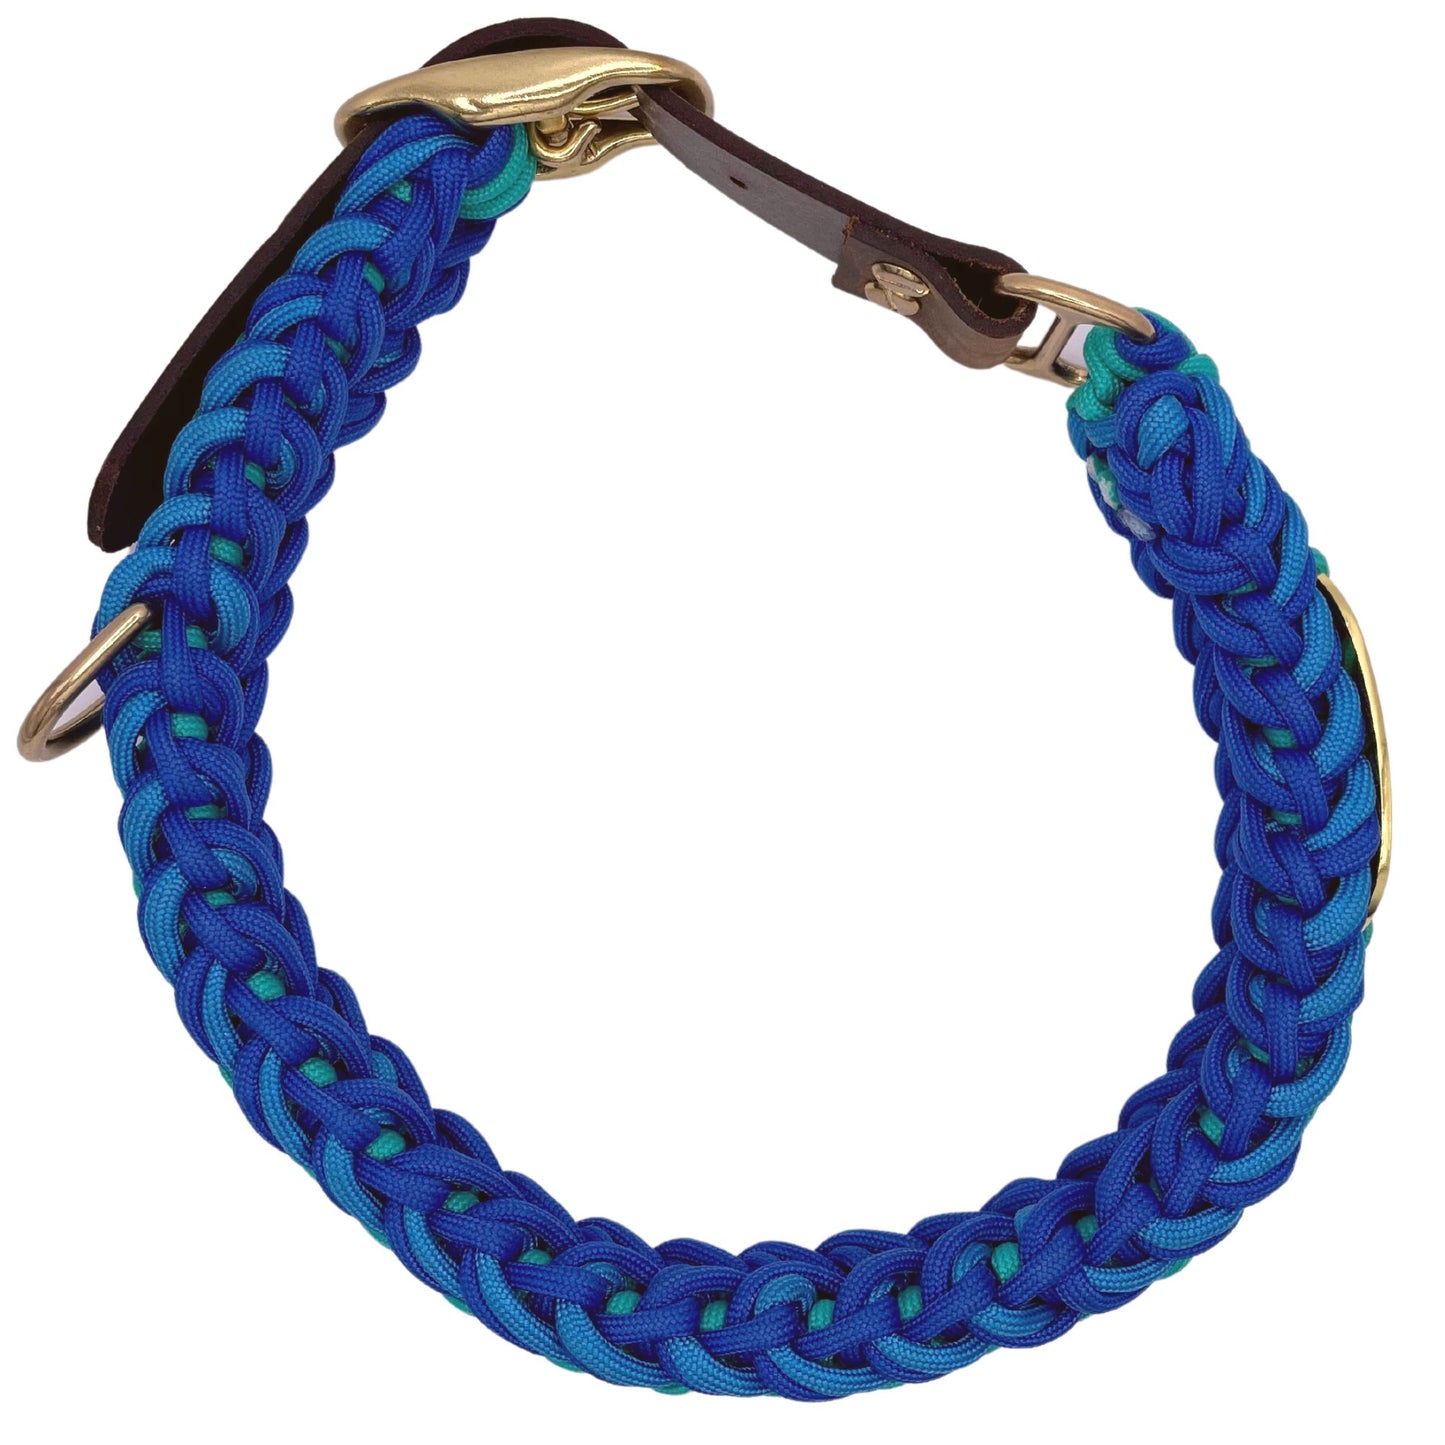 Premium Teal and Blue Paracord Dog Collar with Gold hardware and leather or Biothane belt